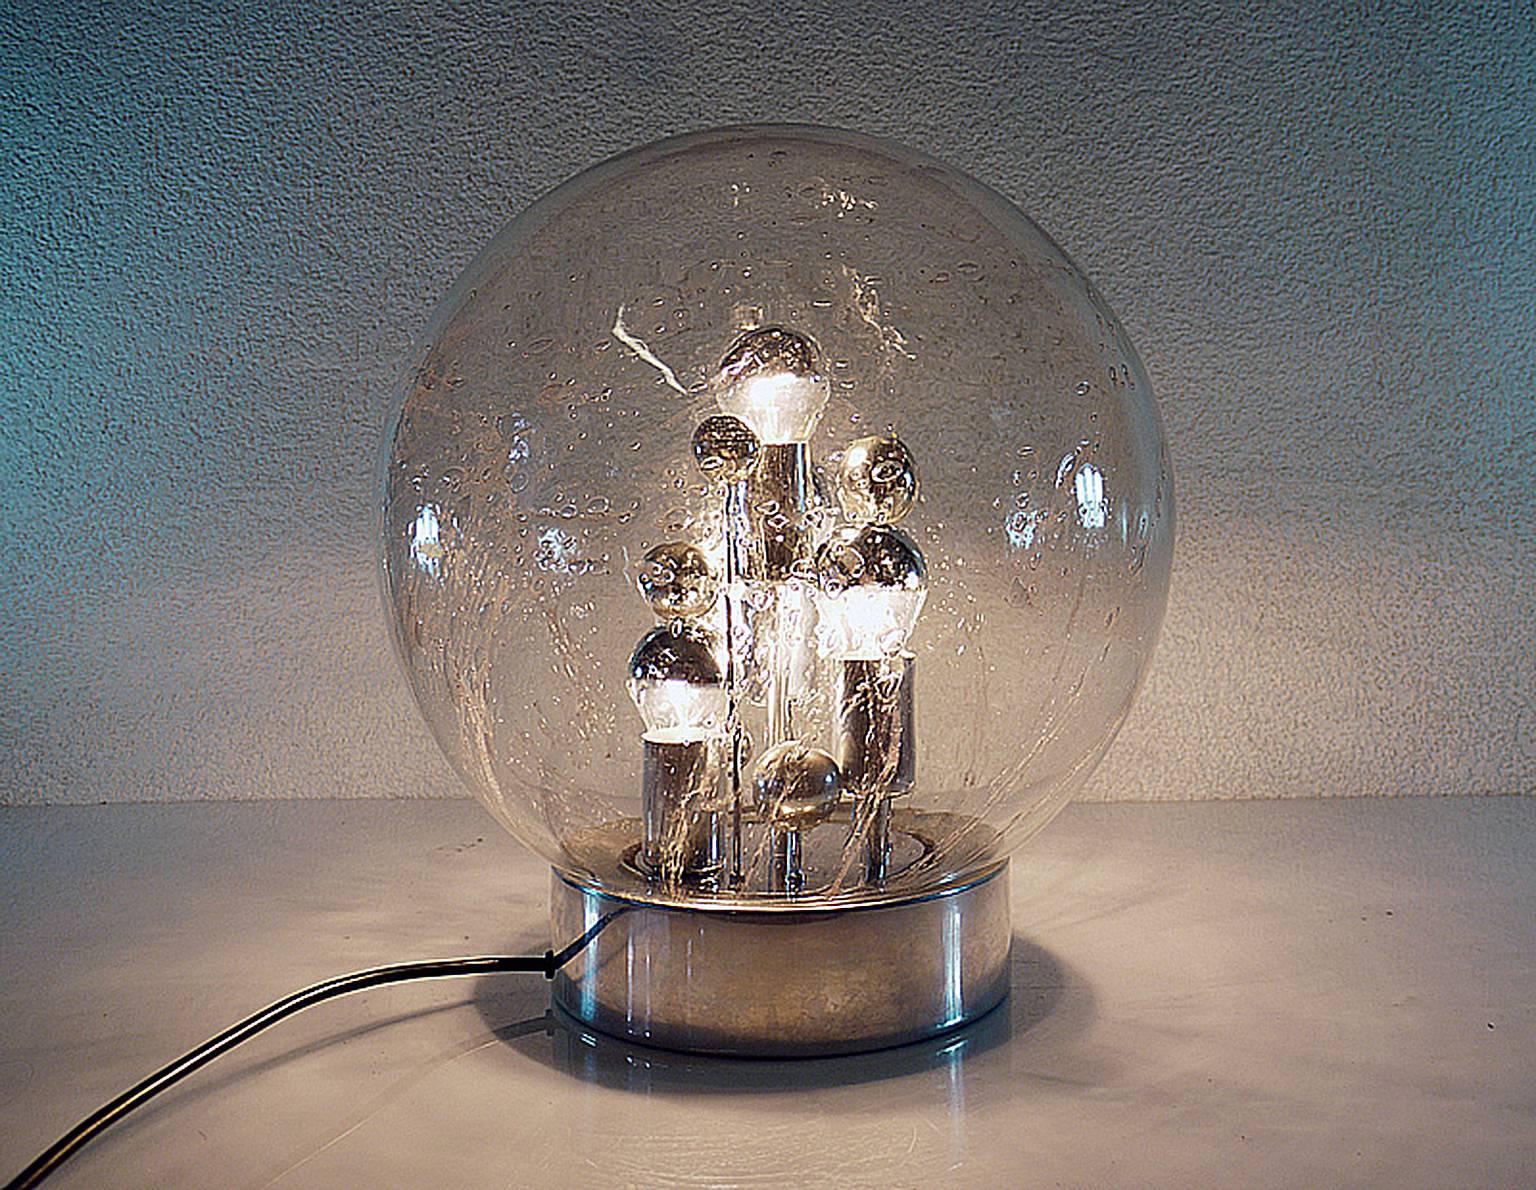 Elegant high quality Sputnik table lamp 'Big Ball' with a heavy, lava-like hand blown bubble glass ball on a chrome-plated base. Inside the lamp there are chrome spheres of different sizes, reminiscent of planet. Heavy design. 

A real design